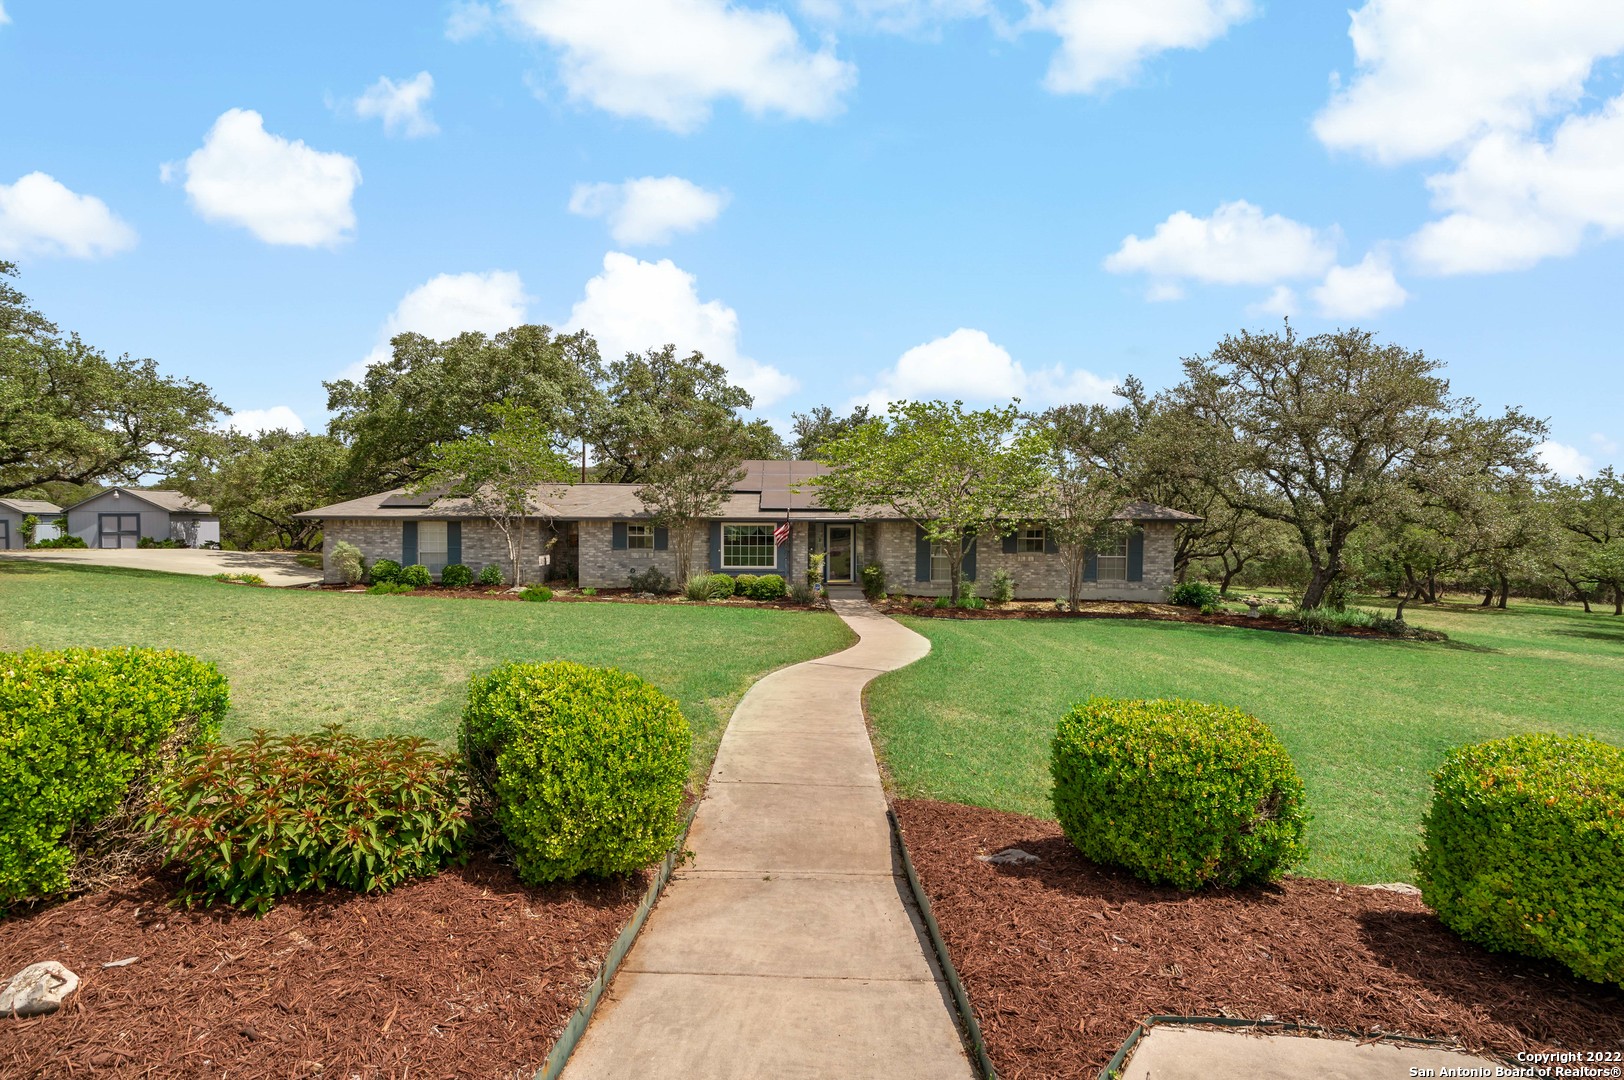 **Reduced Price** You have been waiting for this Home! WOW!  A hidden gem at Lower Smithson Valley and Bulverde Road. Great Location for shopping, dining, and in Comal ISD.  A lovely 3 bd/2.5ba/2 garage home with approximately  2,299  sq.ft. sitting in a park like setting on 2.32 acres. The acreage gives you  breathing room from neighbors and the backyard is great for entertaining.  Situated on quiet one way street in Windmill Ridge Estates with "No" HOA. The home offers Off Grid amenties like Solar Panels, Septic, Well, 3,000 gallon reservoir water tank, and has an installed receptacle port for a generator in the garage.  The home has it all, for self contained living.  The living room is beautiful with its vaulted ceiling and large wood burning fire place which has french doors that opens out to its beautiful wood deck which  allows you to enjoy the serence peace with large mature oak trees, birds, and wild life.  Don't miss Out. Call your agent today to show you this home!